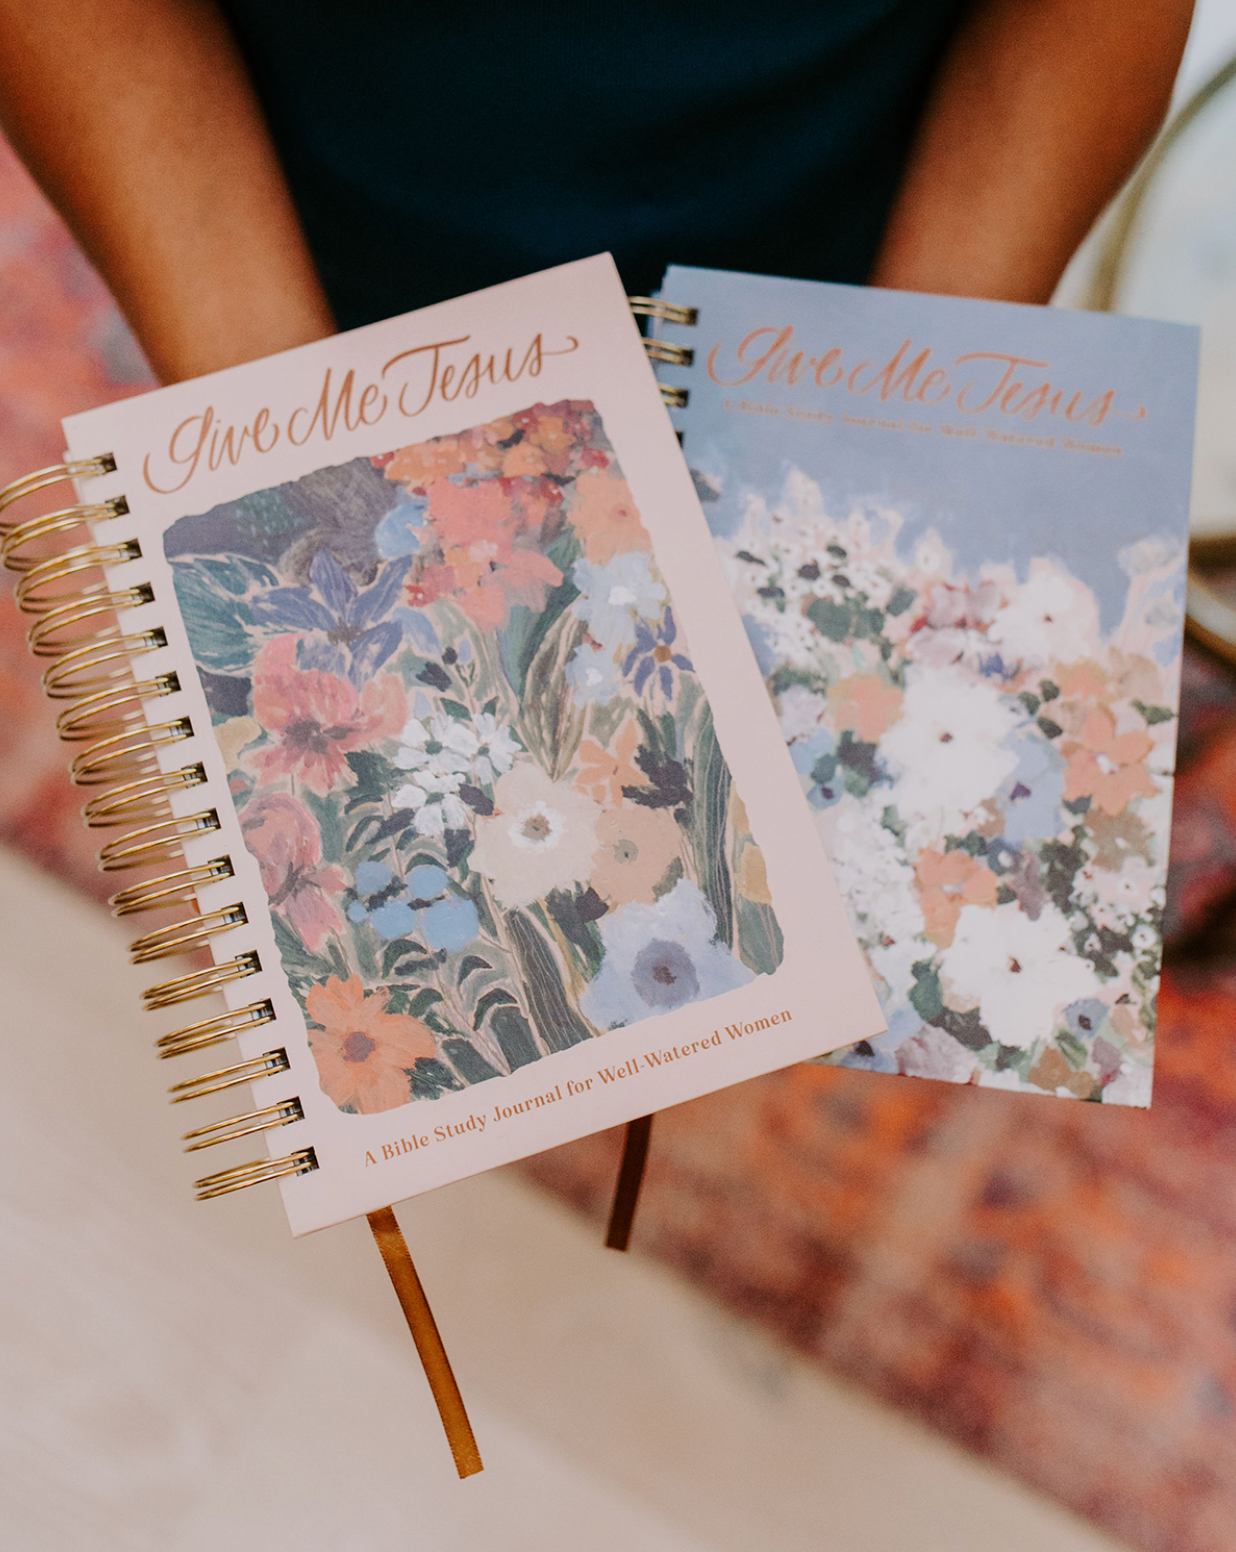 Give Me Jesus Journal – Well-Watered Women